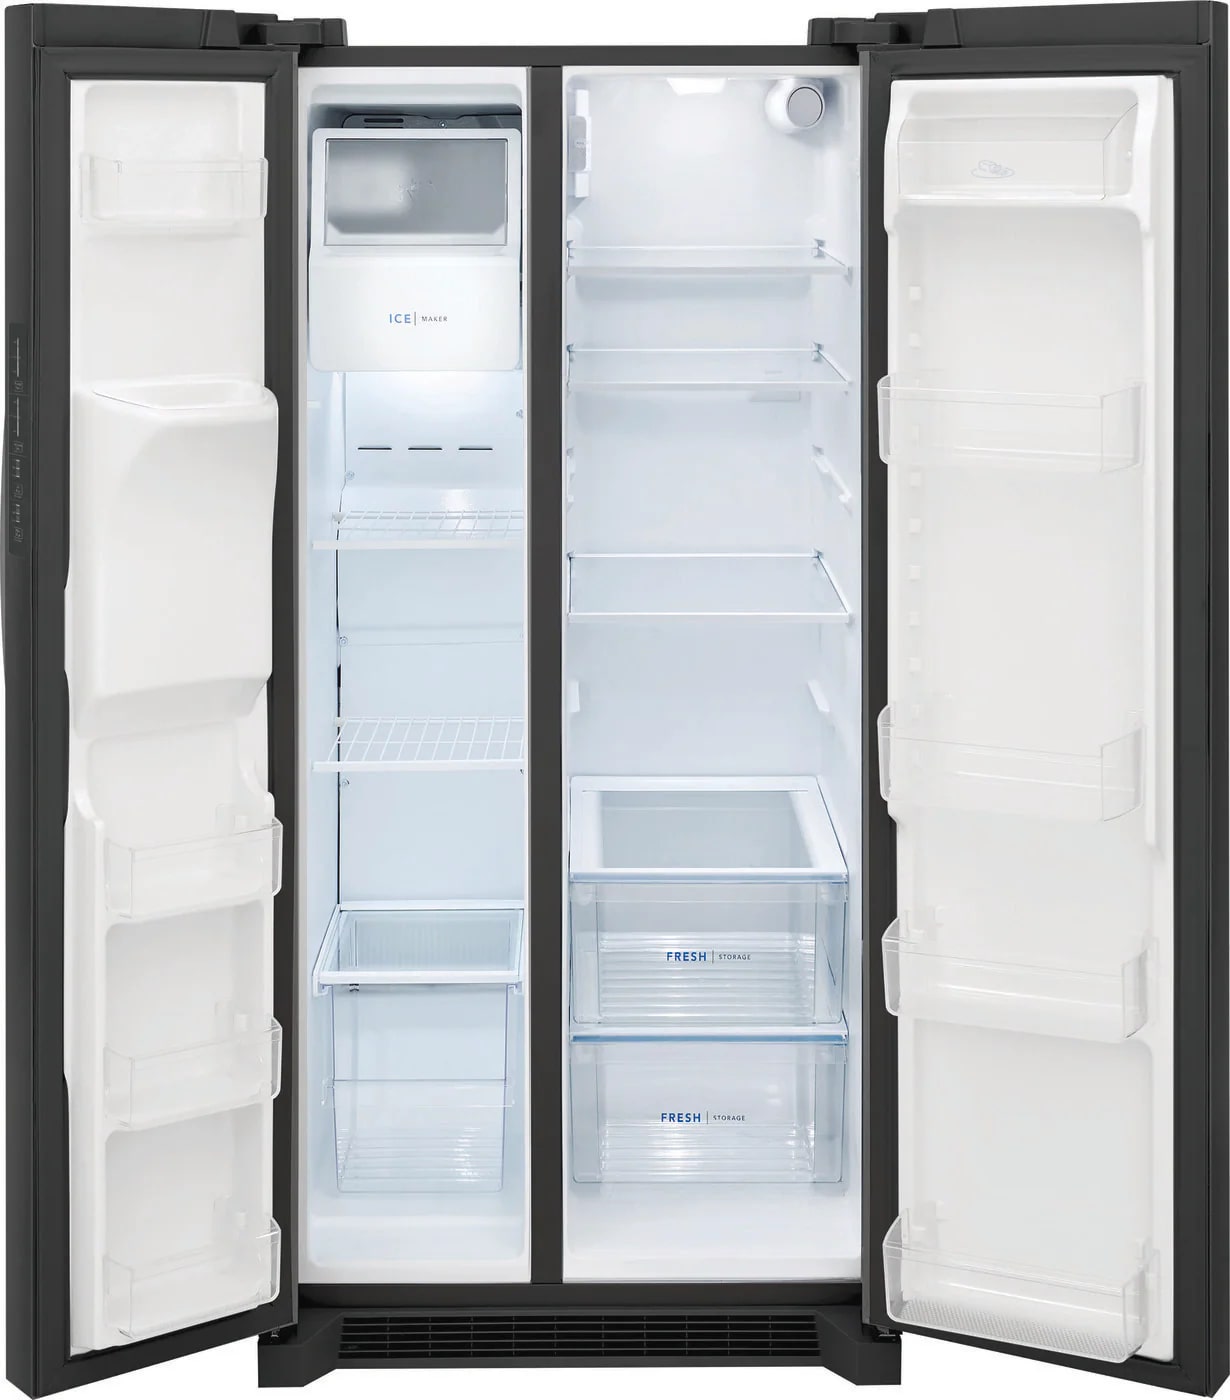 Frigidaire - 33.125 Inch 22.3 cu. ft Side by Side Refrigerator in Black Stainless - FRSS2323AD